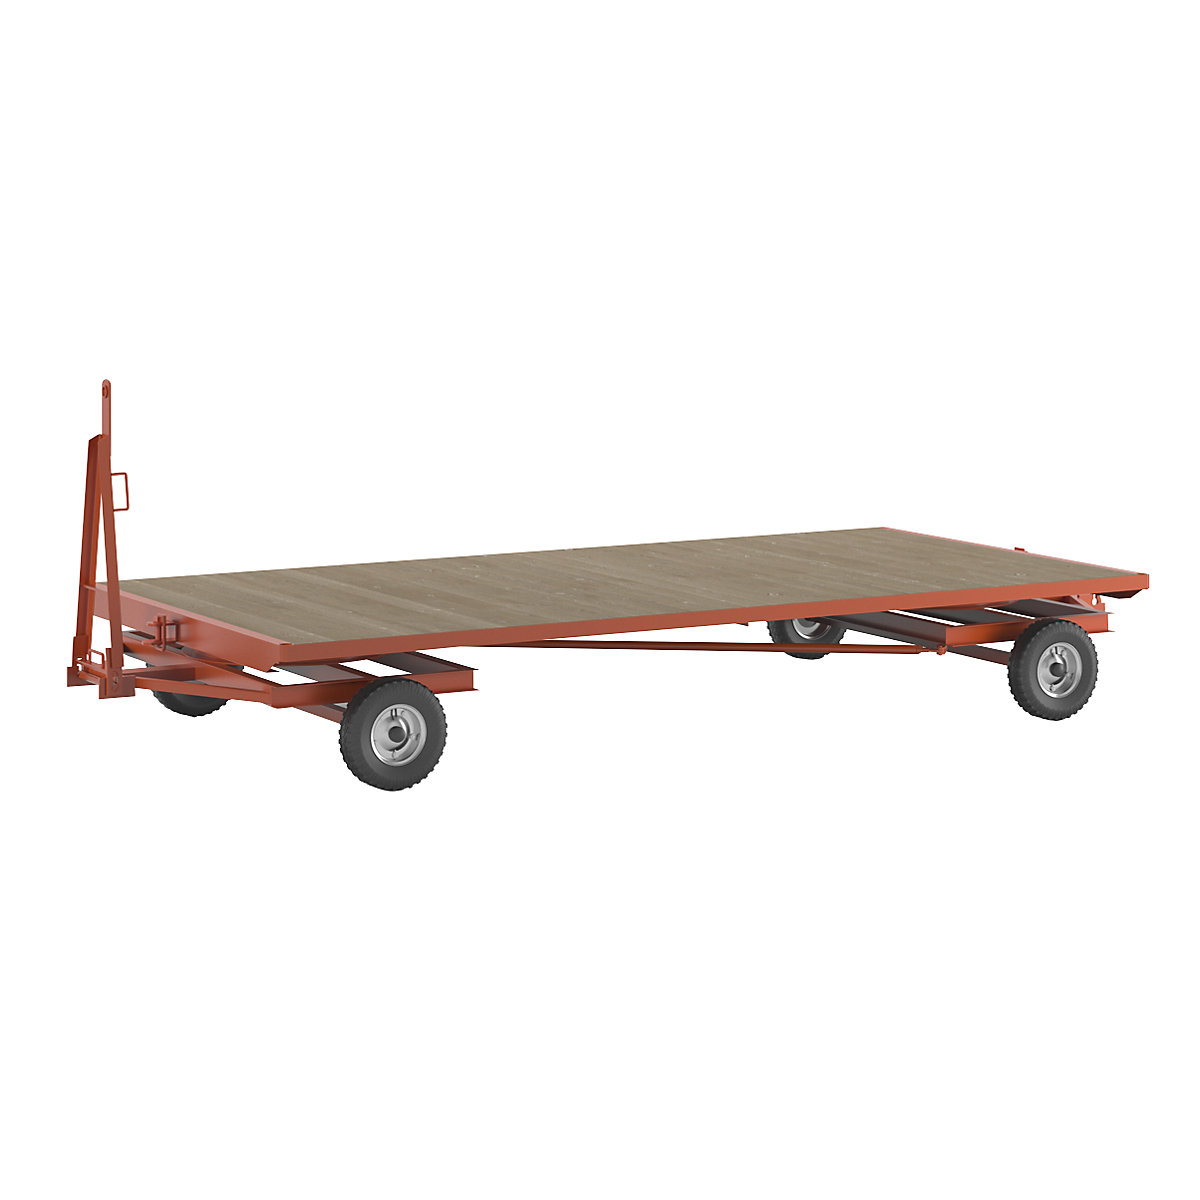 Trailer, 4-wheel double turntable steering, max. load 3 t, platform 4.0 x 2.0 m, pneumatic tyres-17